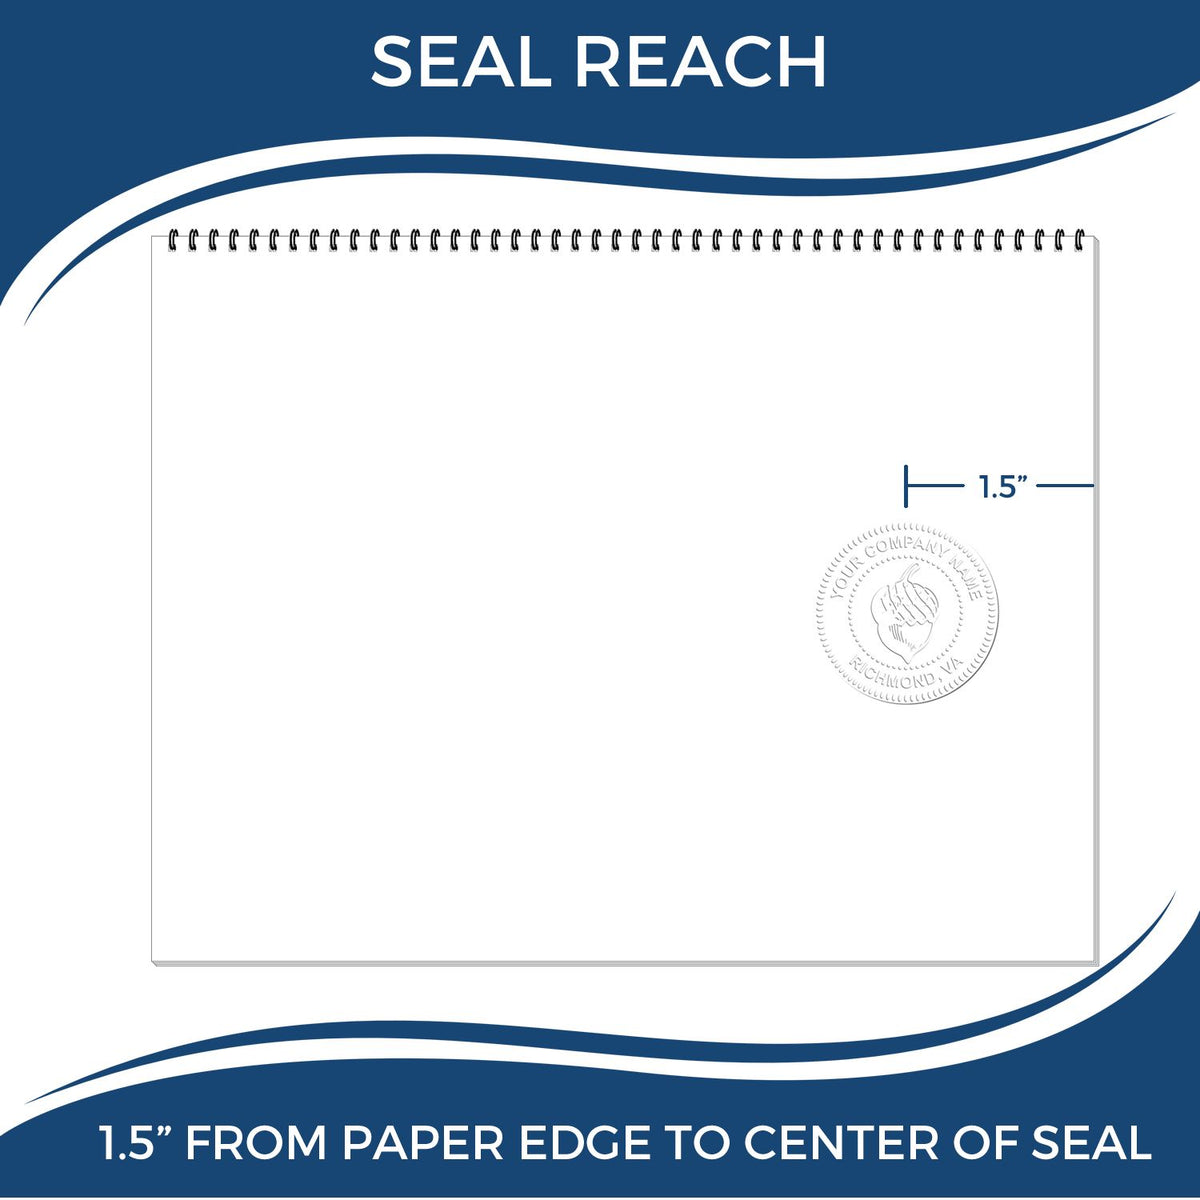 An infographic showing the seal reach which is represented by a ruler and a miniature seal image of the Gift Delaware Engineer Seal